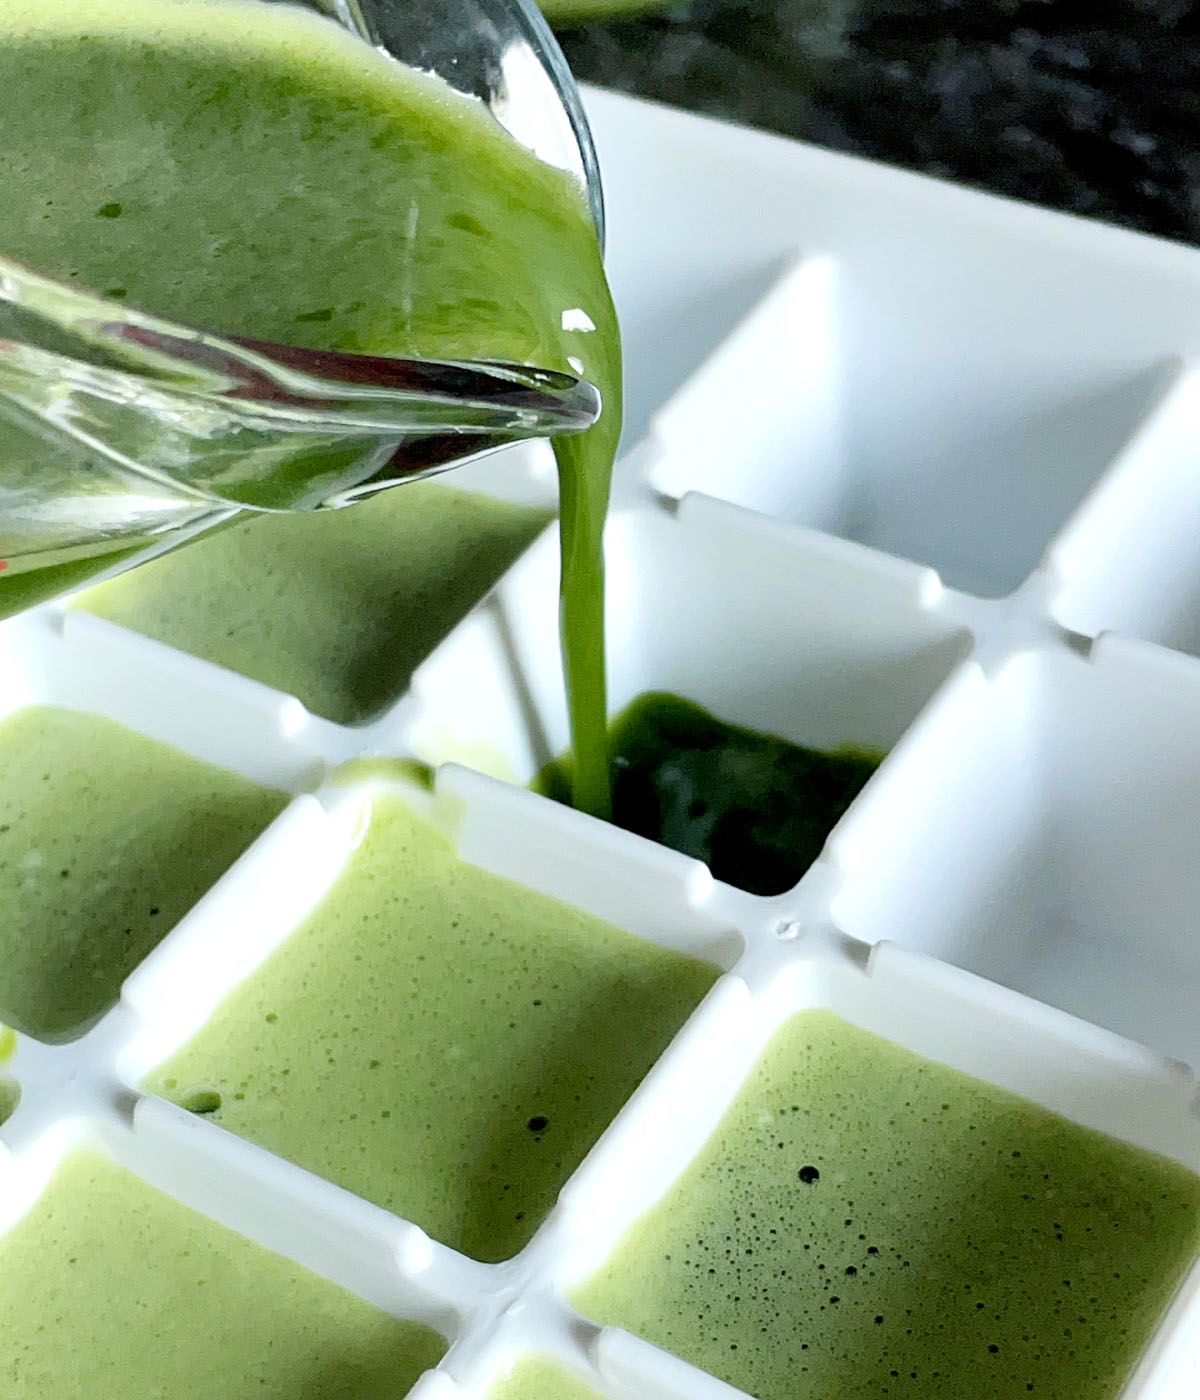 Green liquid being poured into a white ice cube tray.